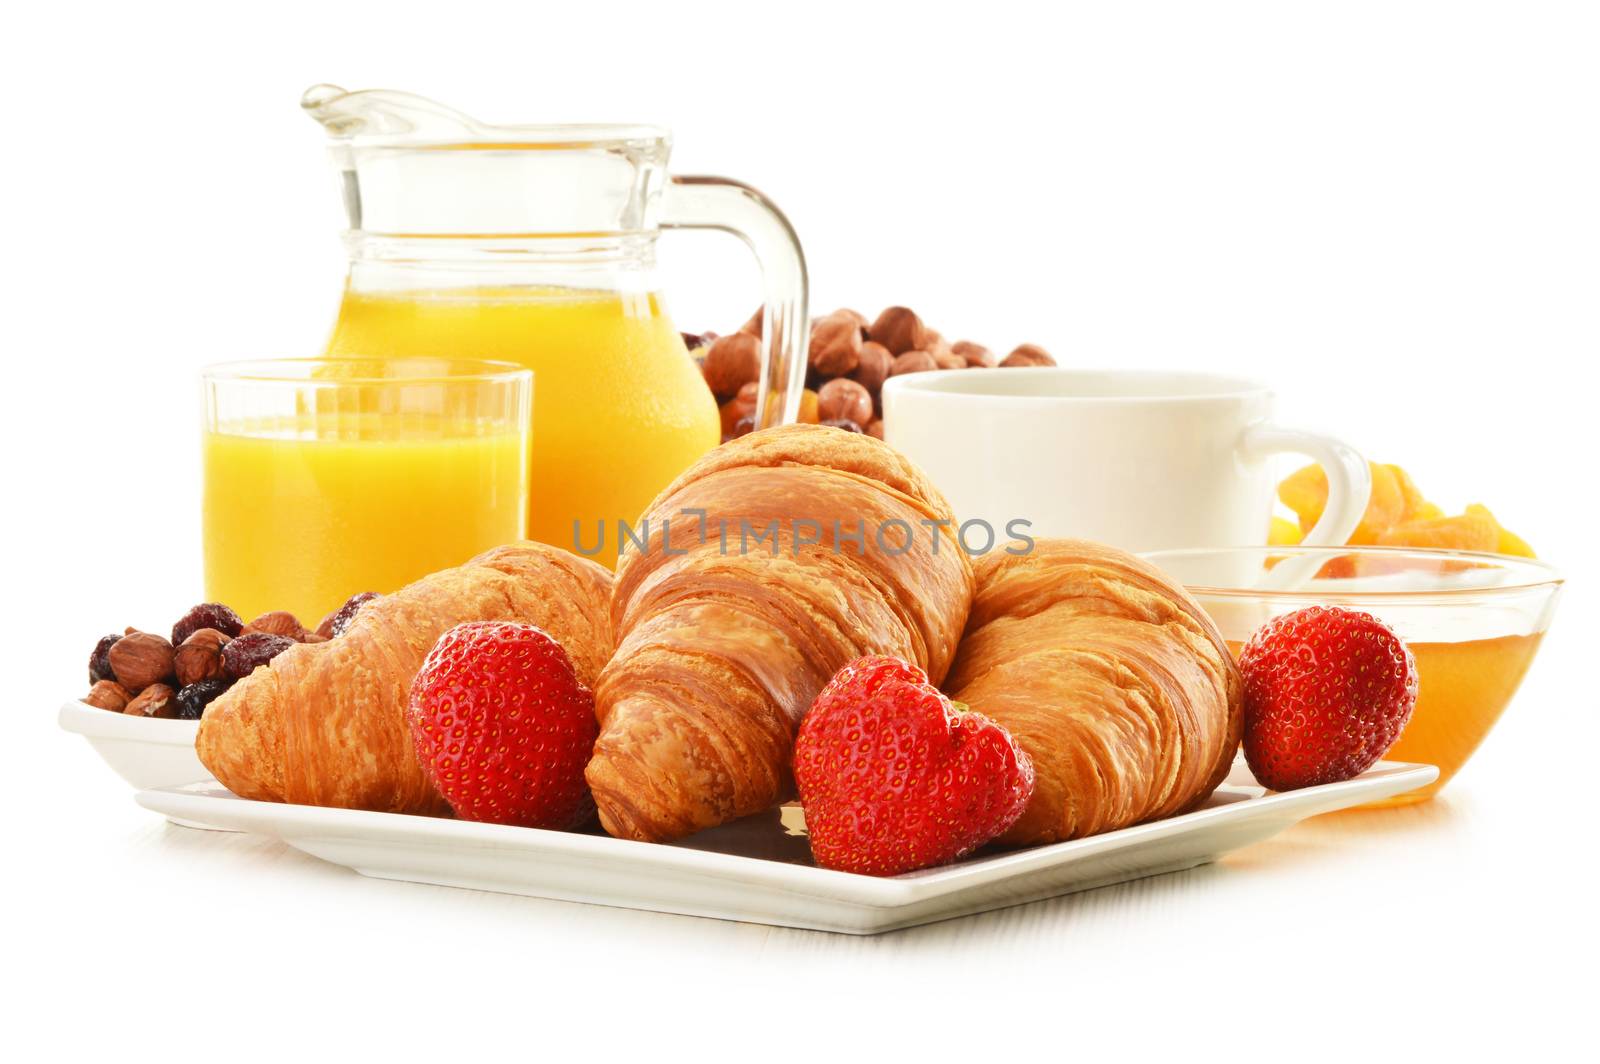 Breakfast with croissants, cup of coffee and fruits